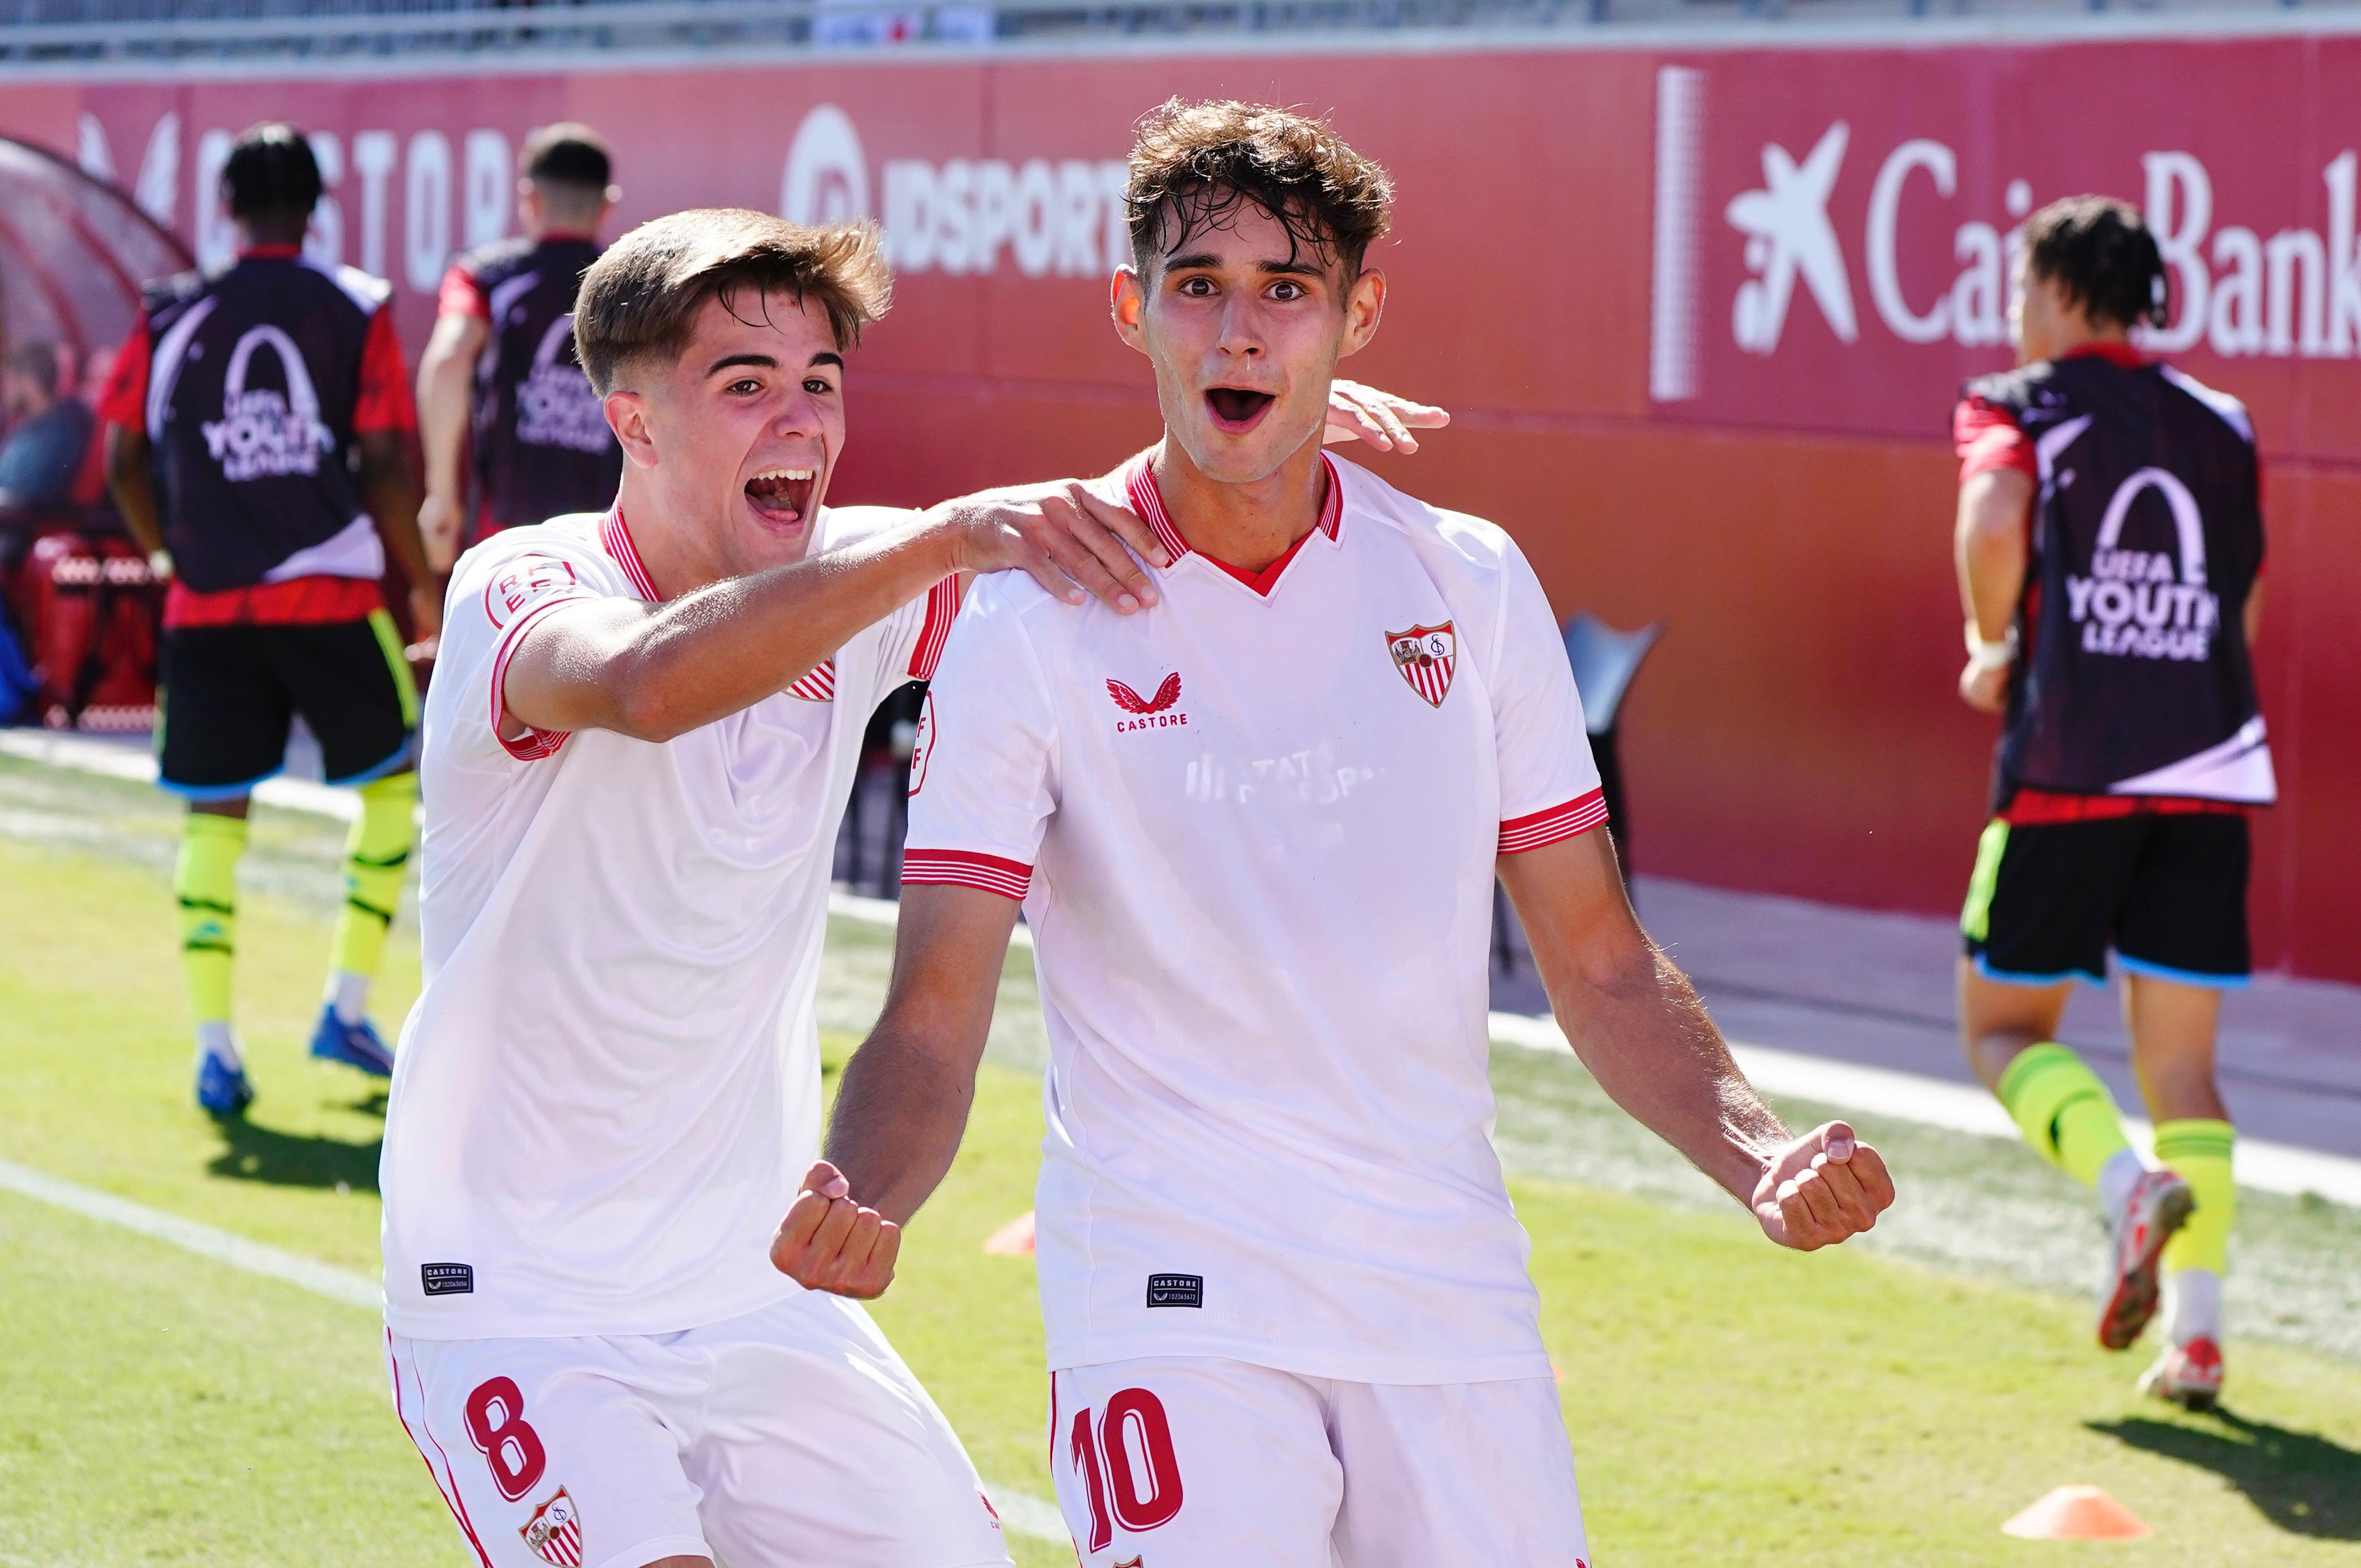 Juvenil A during the win against Arsenal